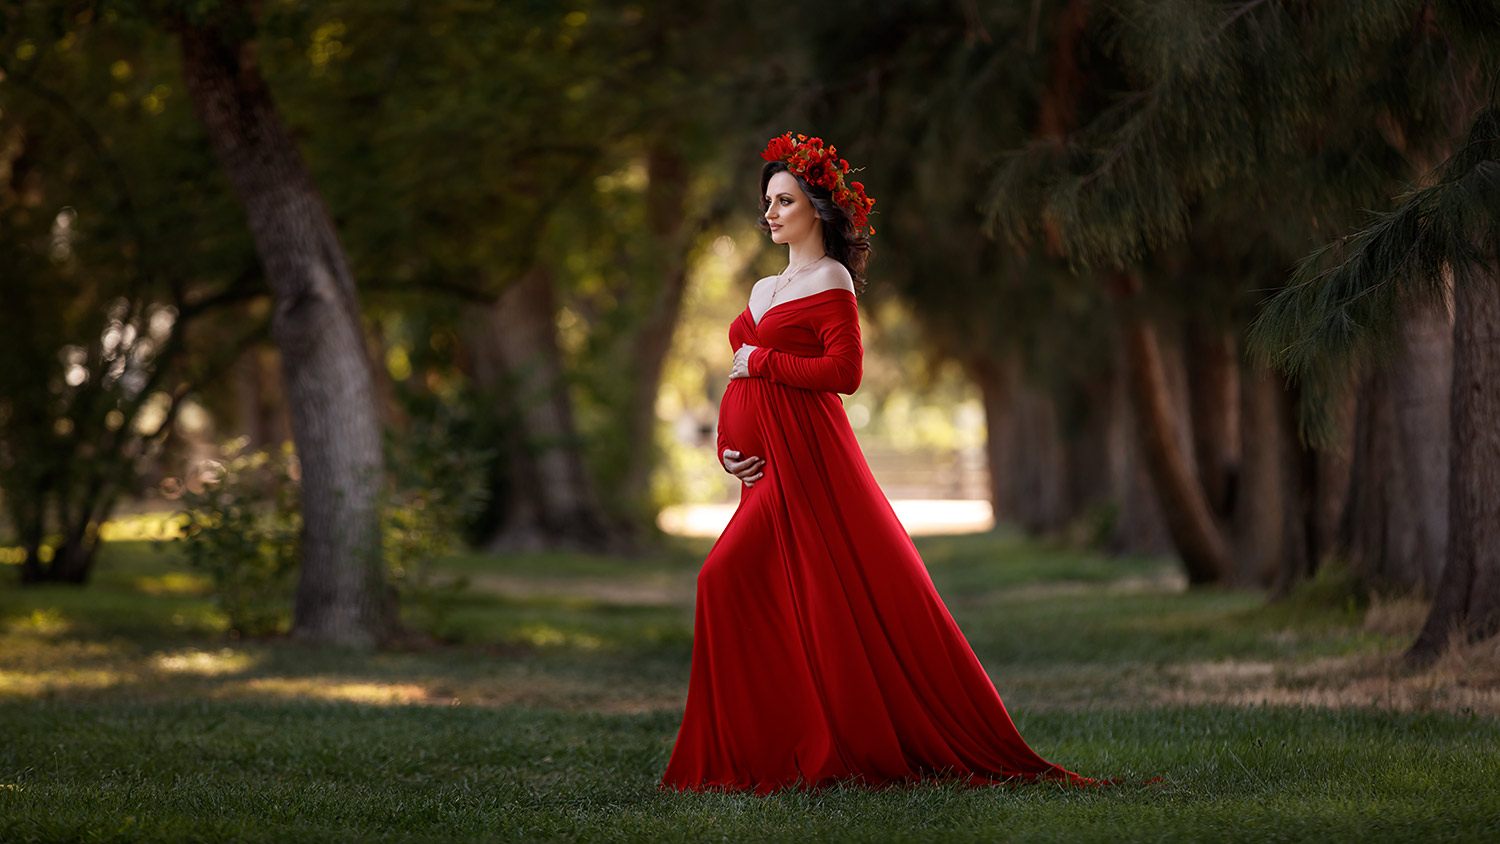 5 Simple Poses to Make Your Maternity Photoshoot Stunning - Elements